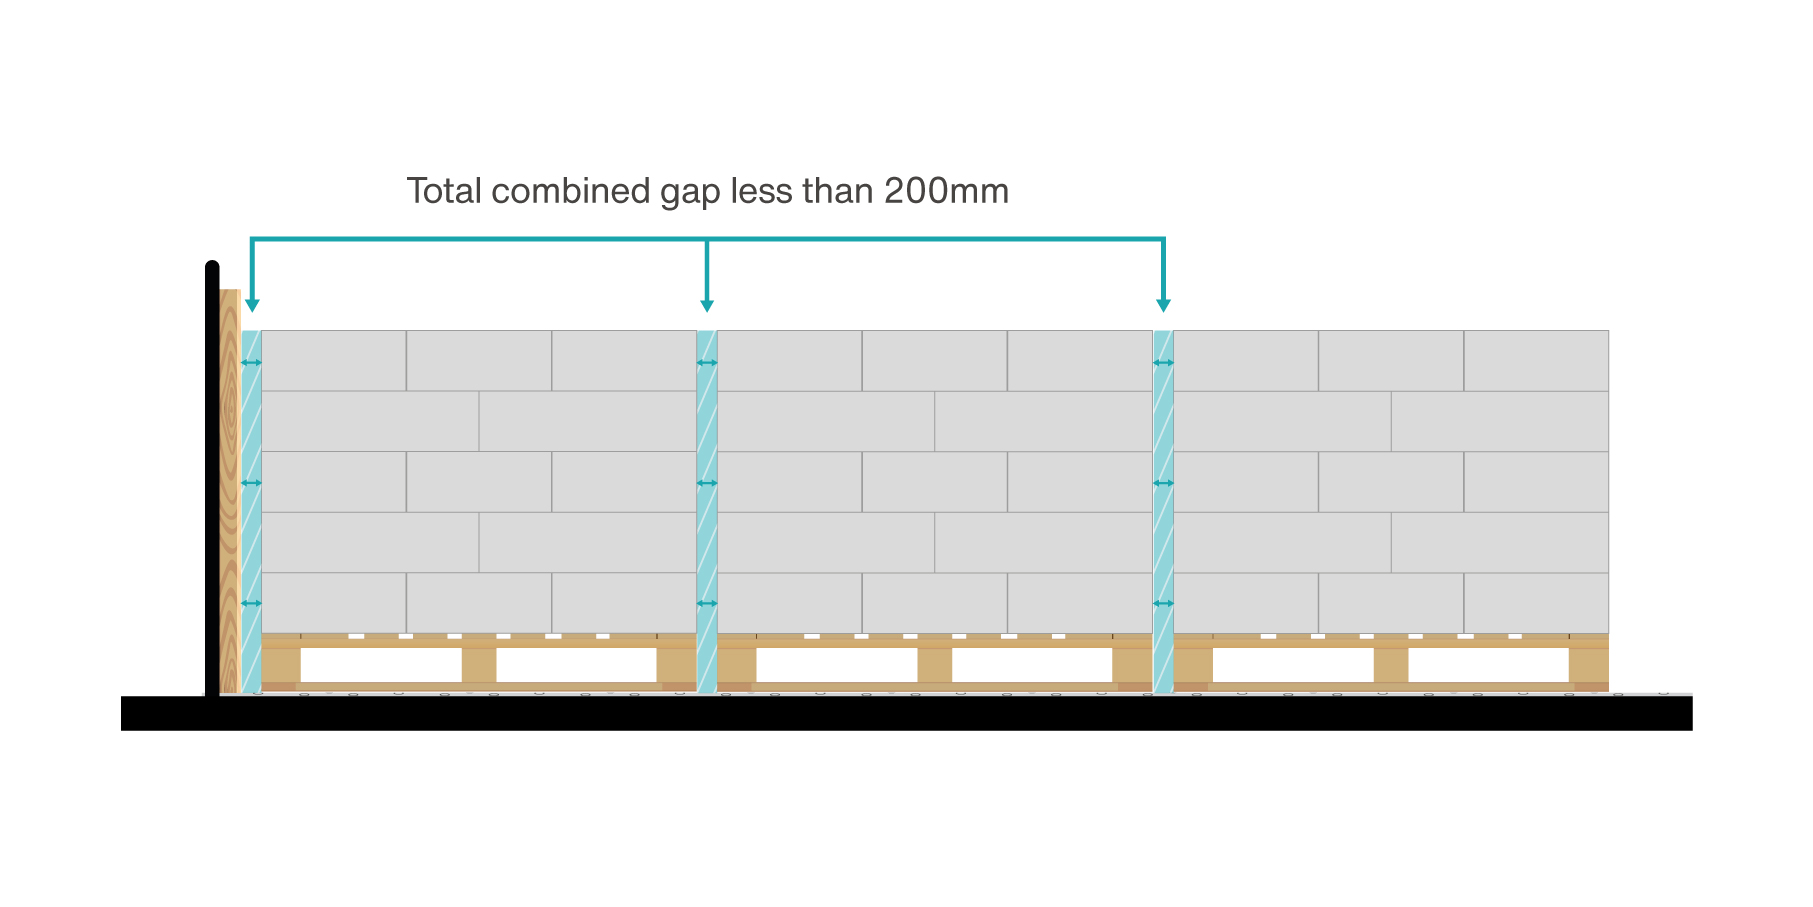 The 200mm gap also applies to gaps along length of the entire load (cumulative).